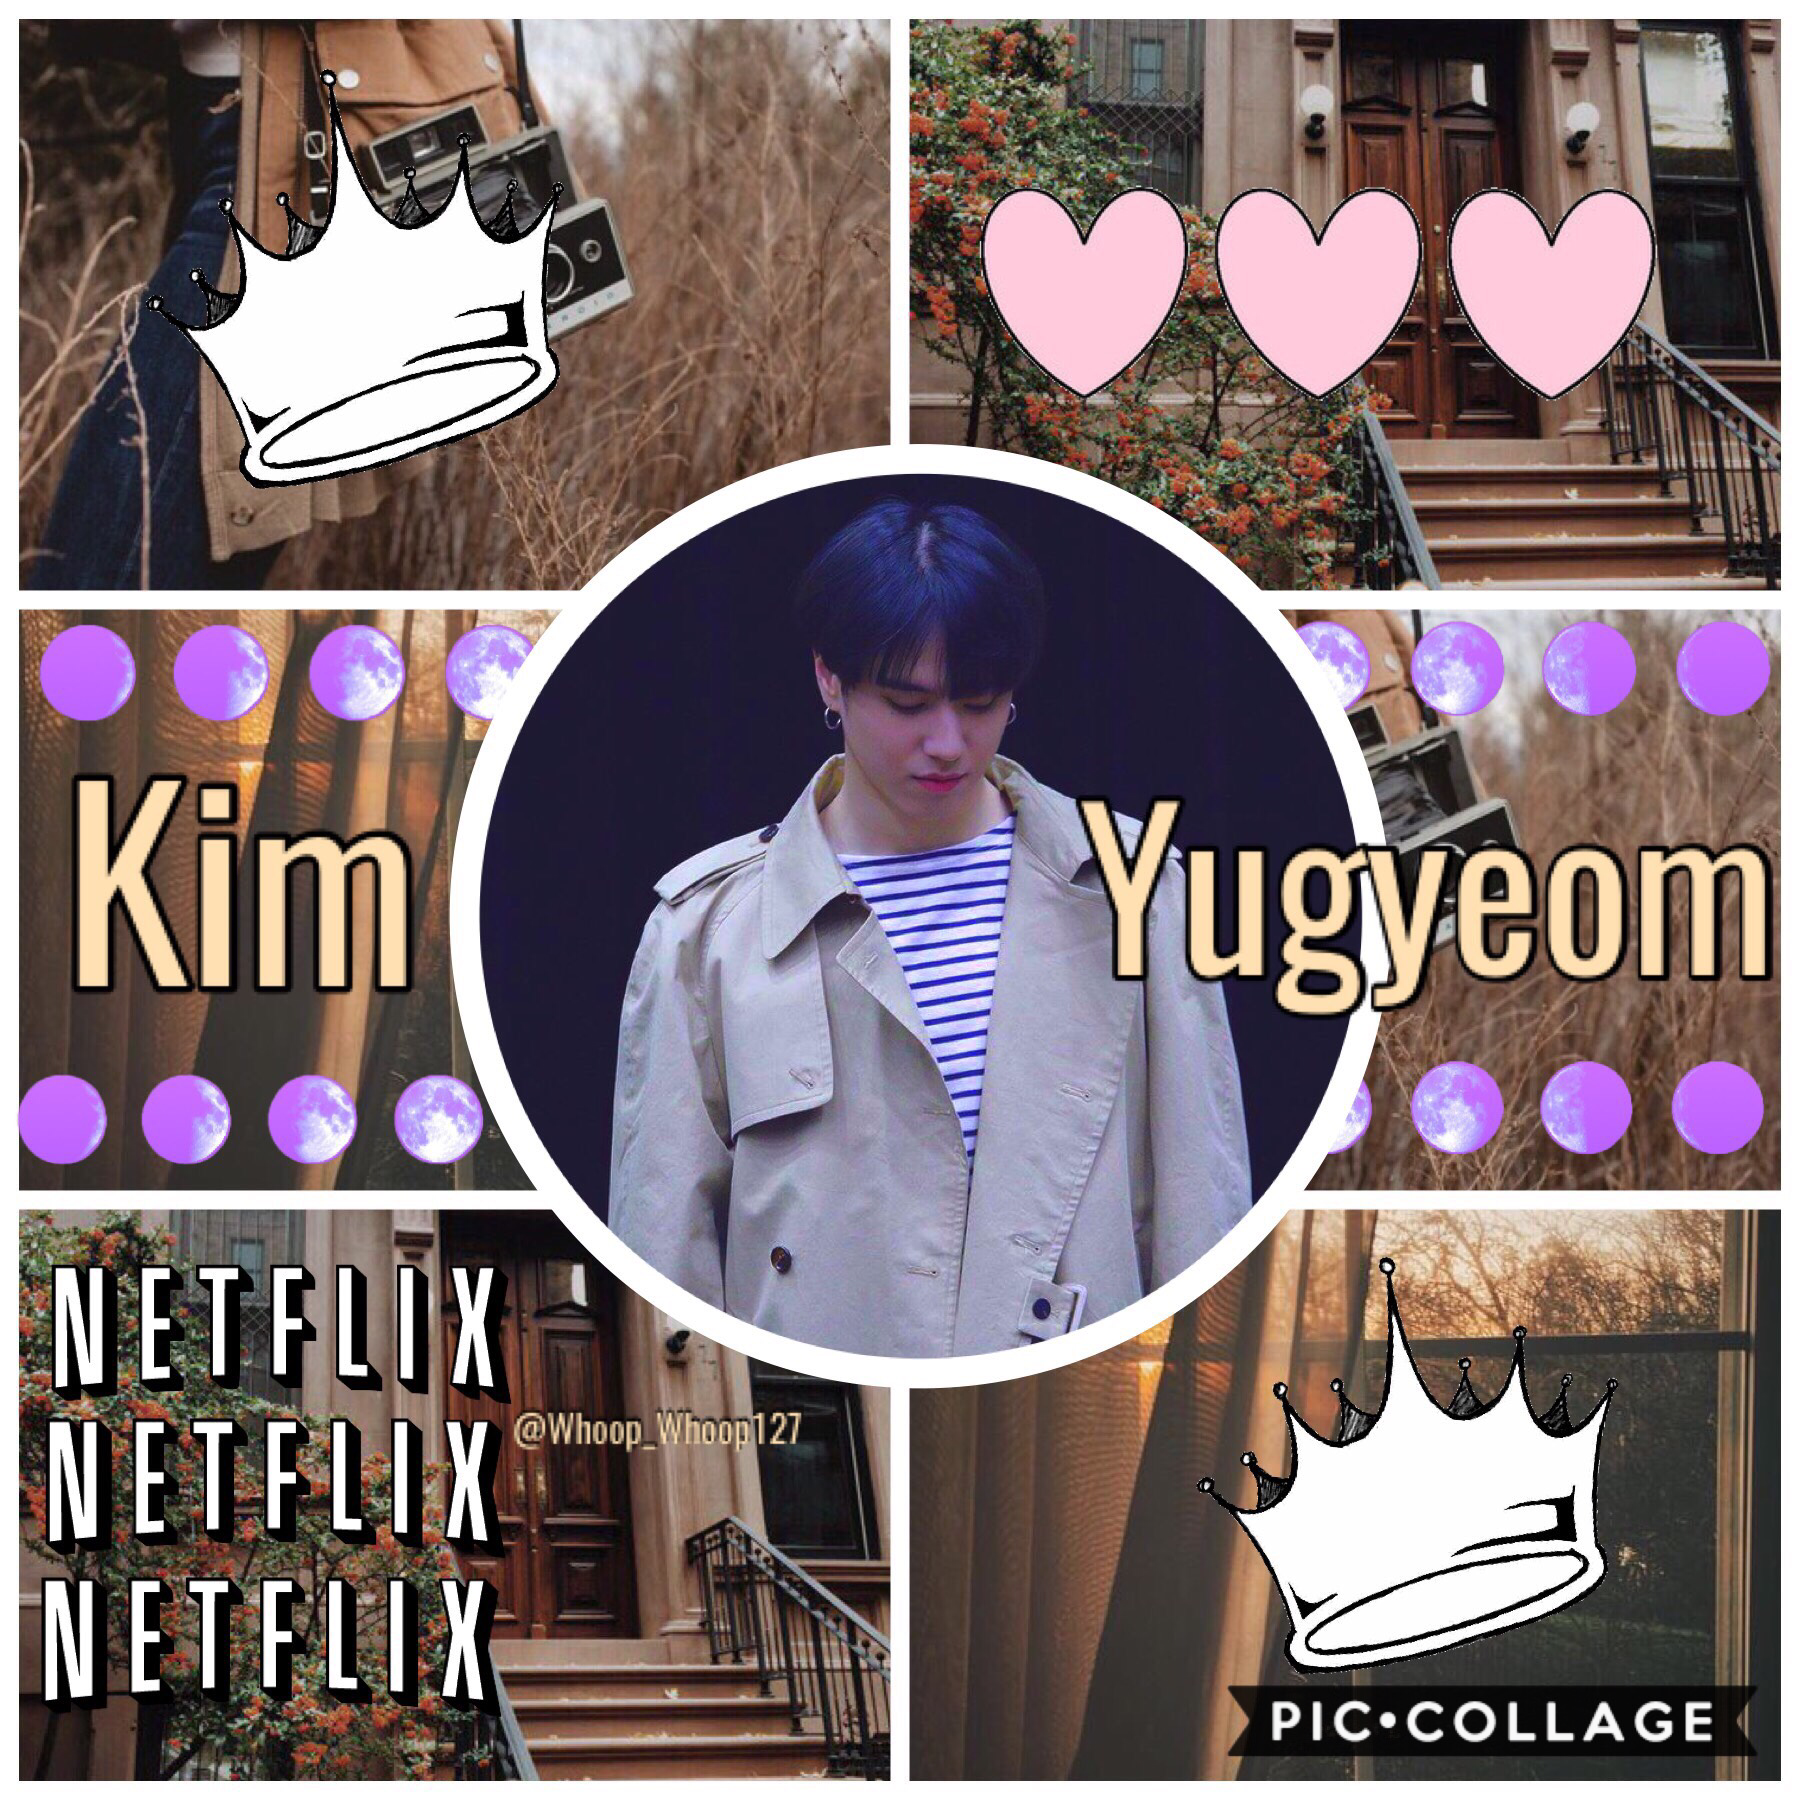 •🚒•
🍂Yugyeom~GOT7🍂
Edit for @MAGICSHOP❤️
We love our dancing king 👑 
Welcome back Beu:)💞💞
ATEEZ Pirate King is such a bop wowowowow